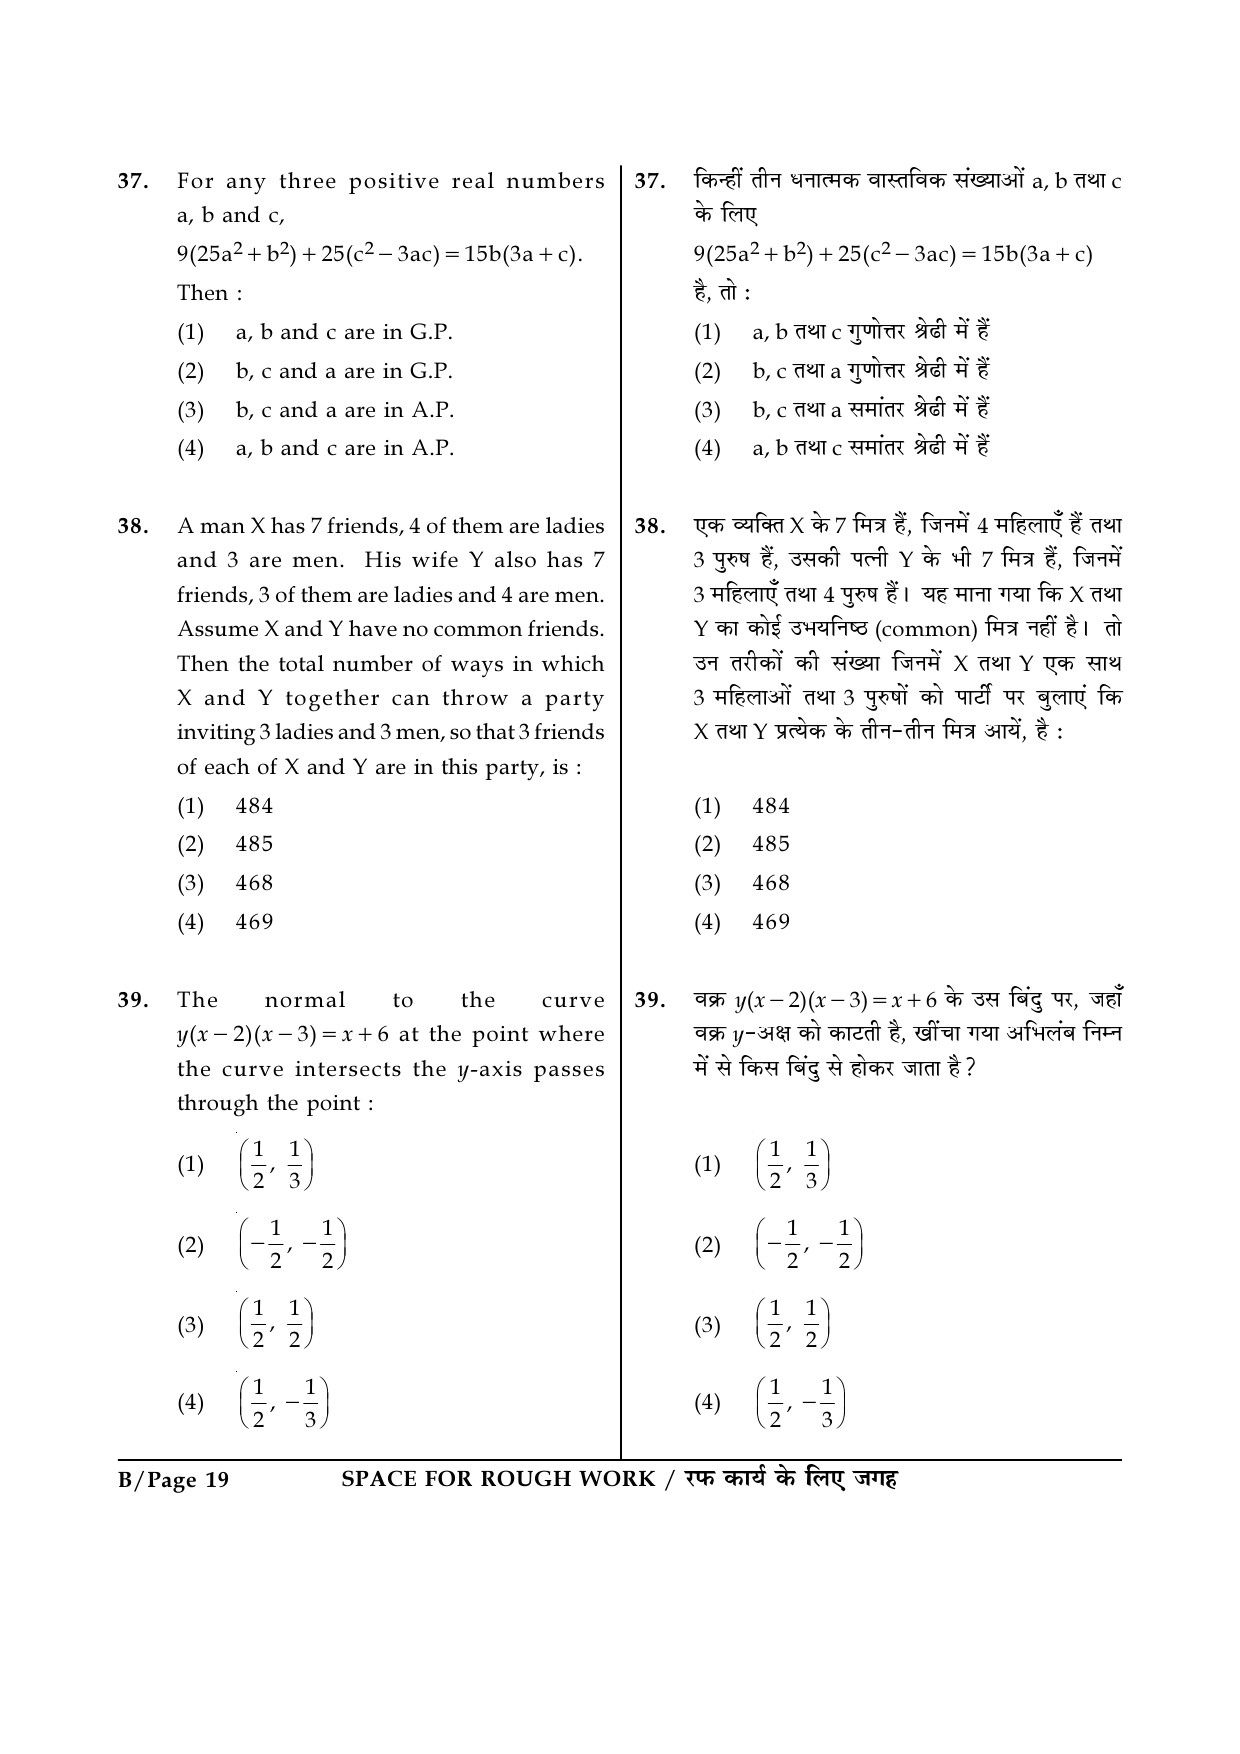 JEE Main Exam Question Paper 2017 Booklet B 19